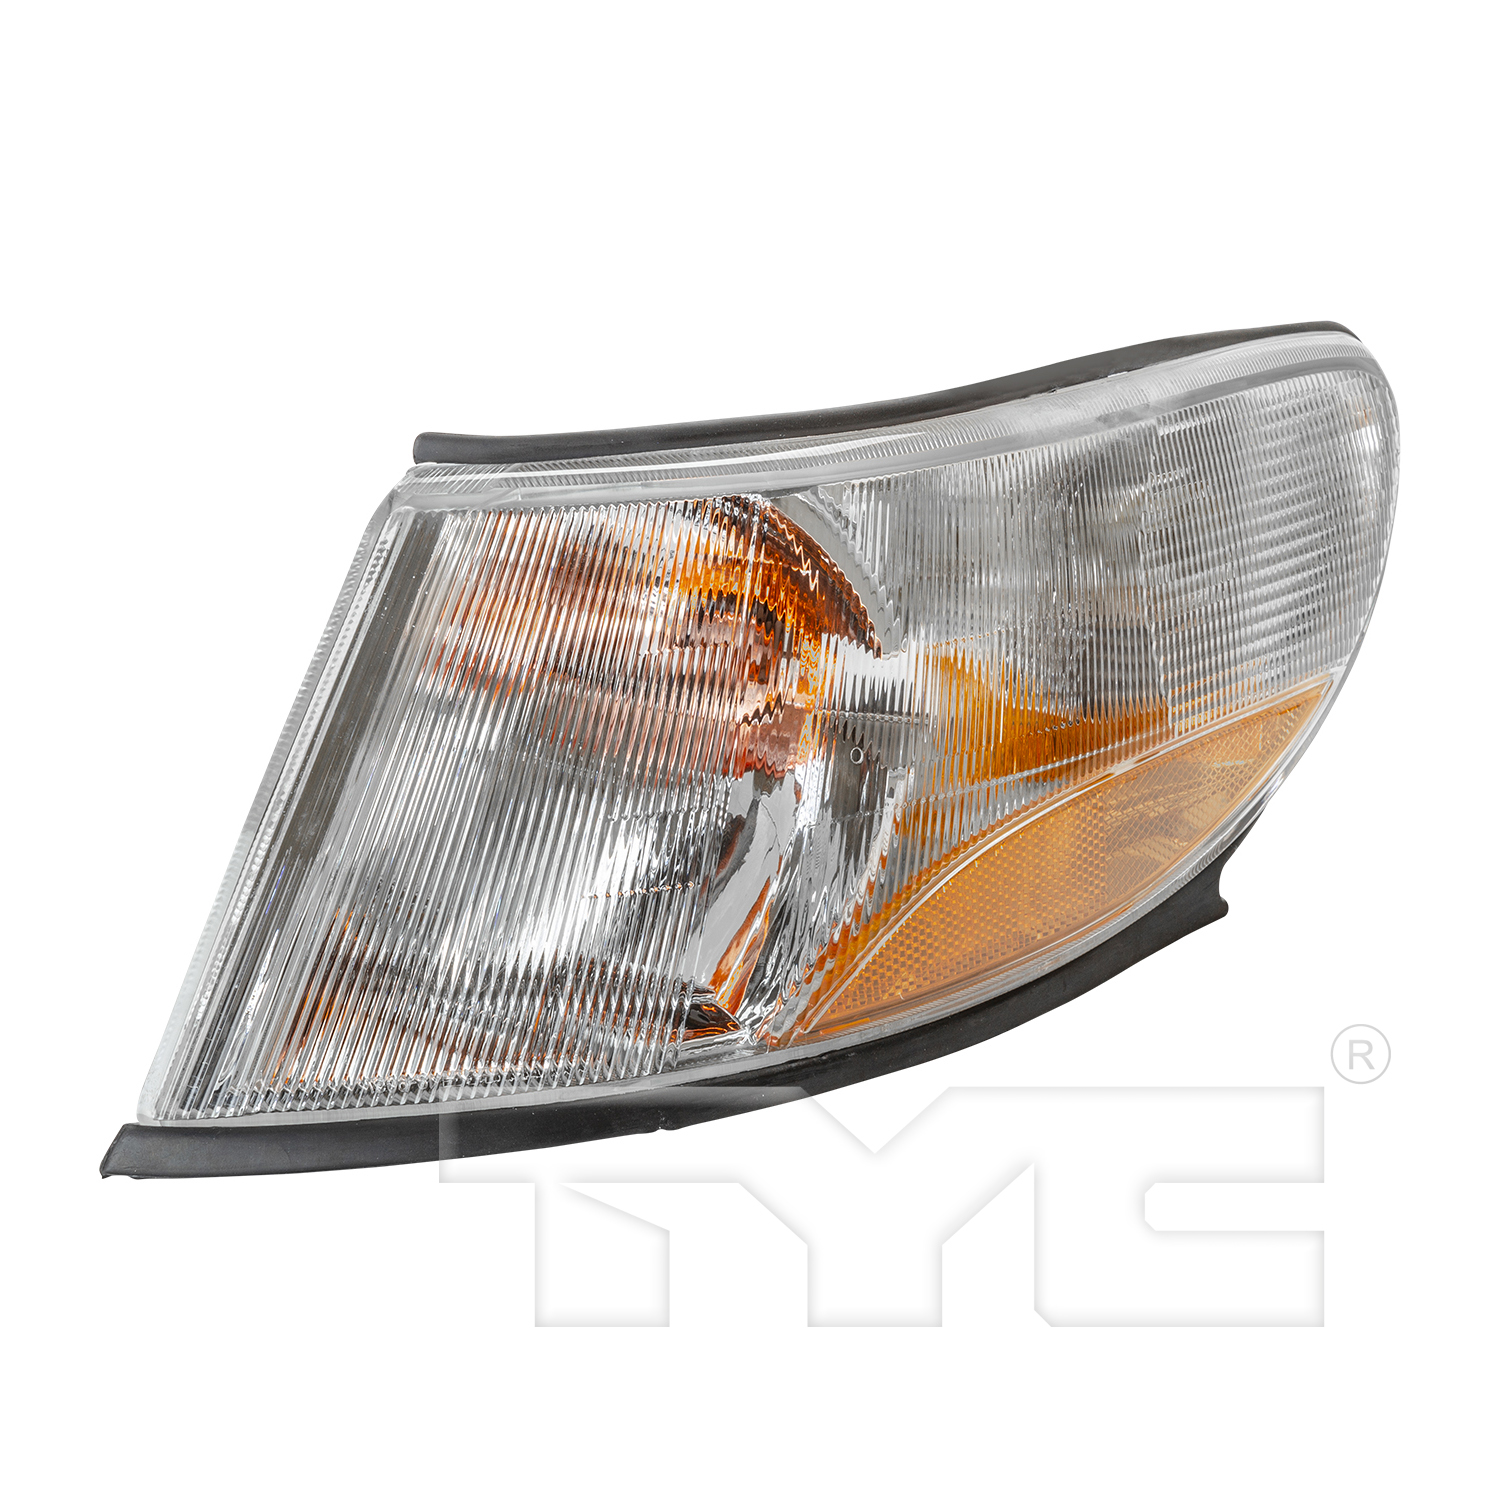 Aftermarket LAMPS for SAAB - 9-3, 9-3,03-03,LT Front signal lamp